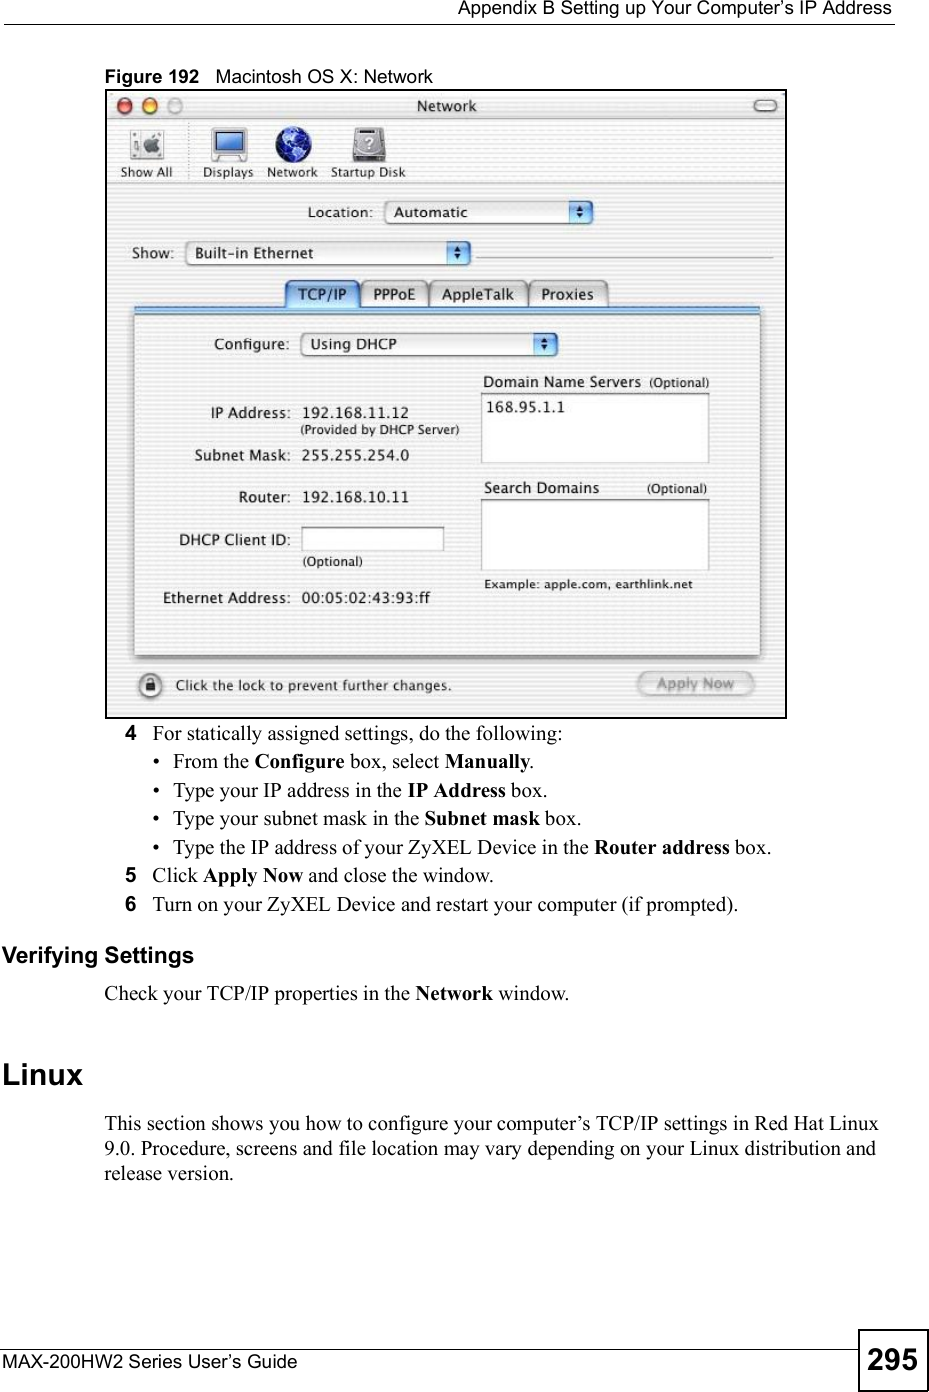  Appendix BSetting up Your Computer s IP AddressMAX-200HW2 Series User s Guide 295Figure 192   Macintosh OS X: Network4For statically assigned settings, do the following: From the Configure box, select Manually. Type your IP address in the IP Address box. Type your subnet mask in the Subnet mask box. Type the IP address of your ZyXEL Device in the Router address box.5Click Apply Now and close the window.6Turn on your ZyXEL Device and restart your computer (if prompted).Verifying SettingsCheck your TCP/IP properties in the Network window.LinuxThis section shows you how to configure your computer!s TCP/IP settings in Red Hat Linux 9.0. Procedure, screens and file location may vary depending on your Linux distribution and release version. 